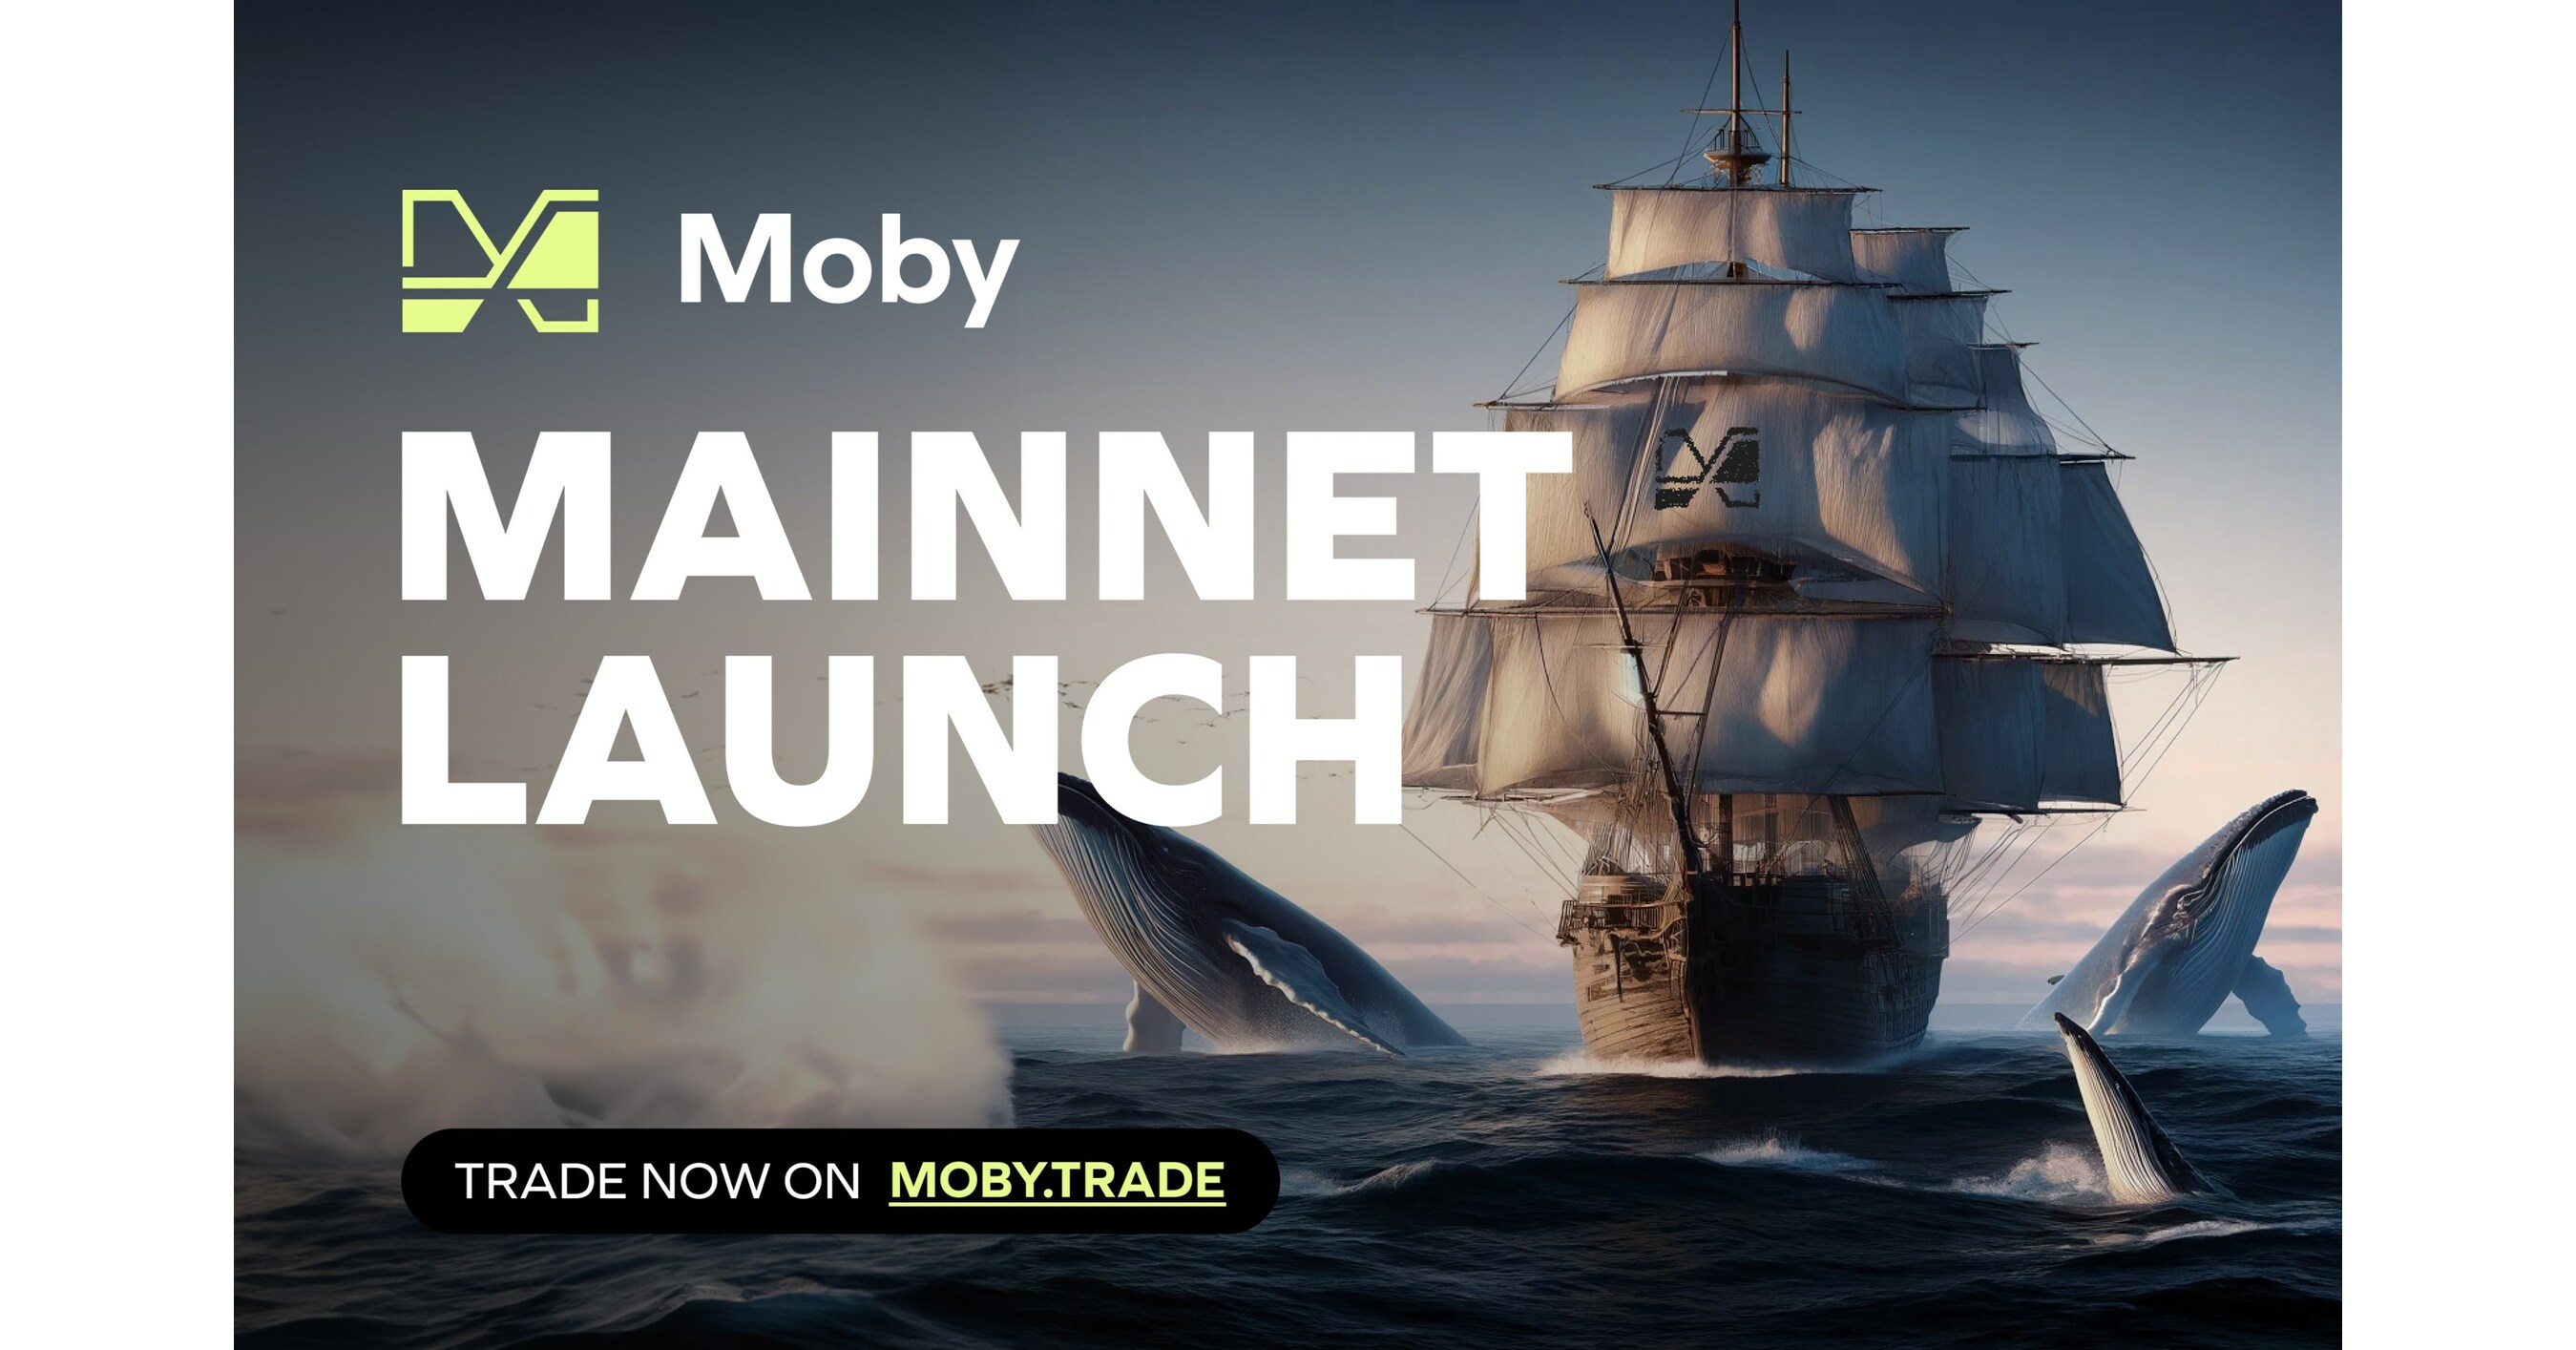 Moby, the Next On-chain Options Protocol, Mainnet Launch